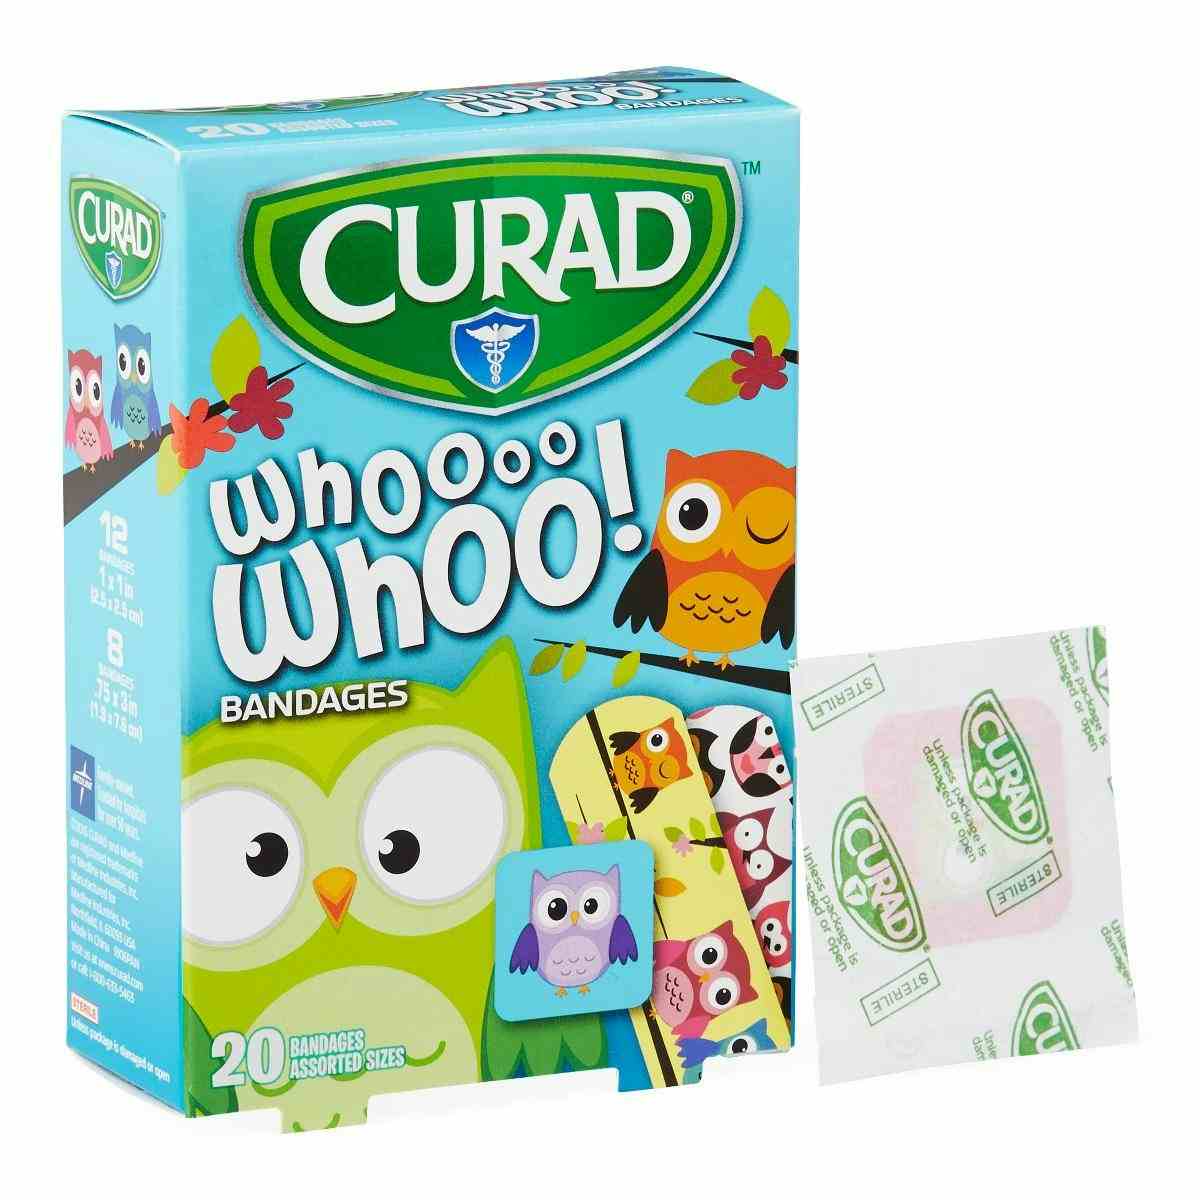 Curad Owl Adhesive Bandages, Assorted Sizes , CUR00004RBH, Box of 20 